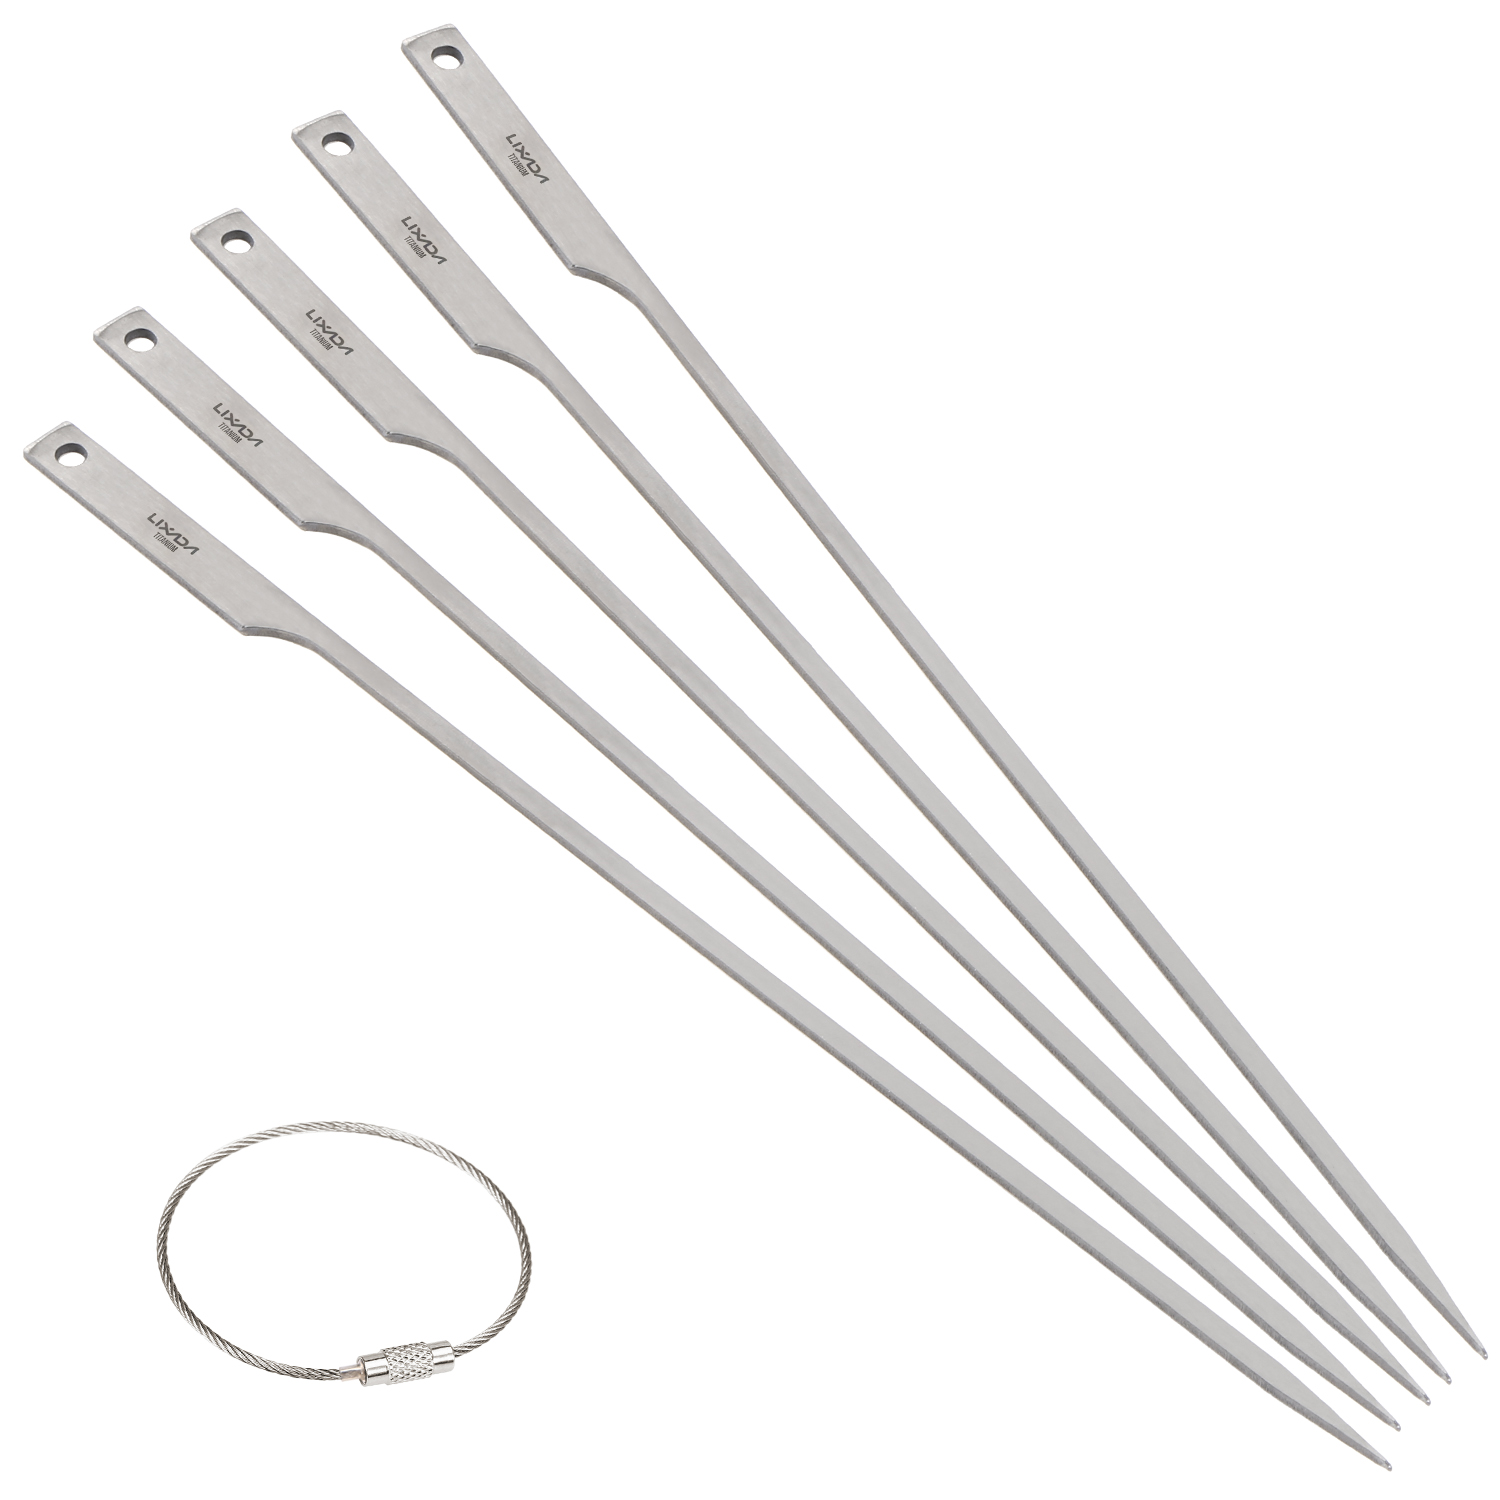 Lixada 5pcs 10 Inch Flat Barbecue Skewers Backyard Picnic BBQ Grilling Kabob Skewers BBQ Sticks with Wire Ring - image 5 of 7